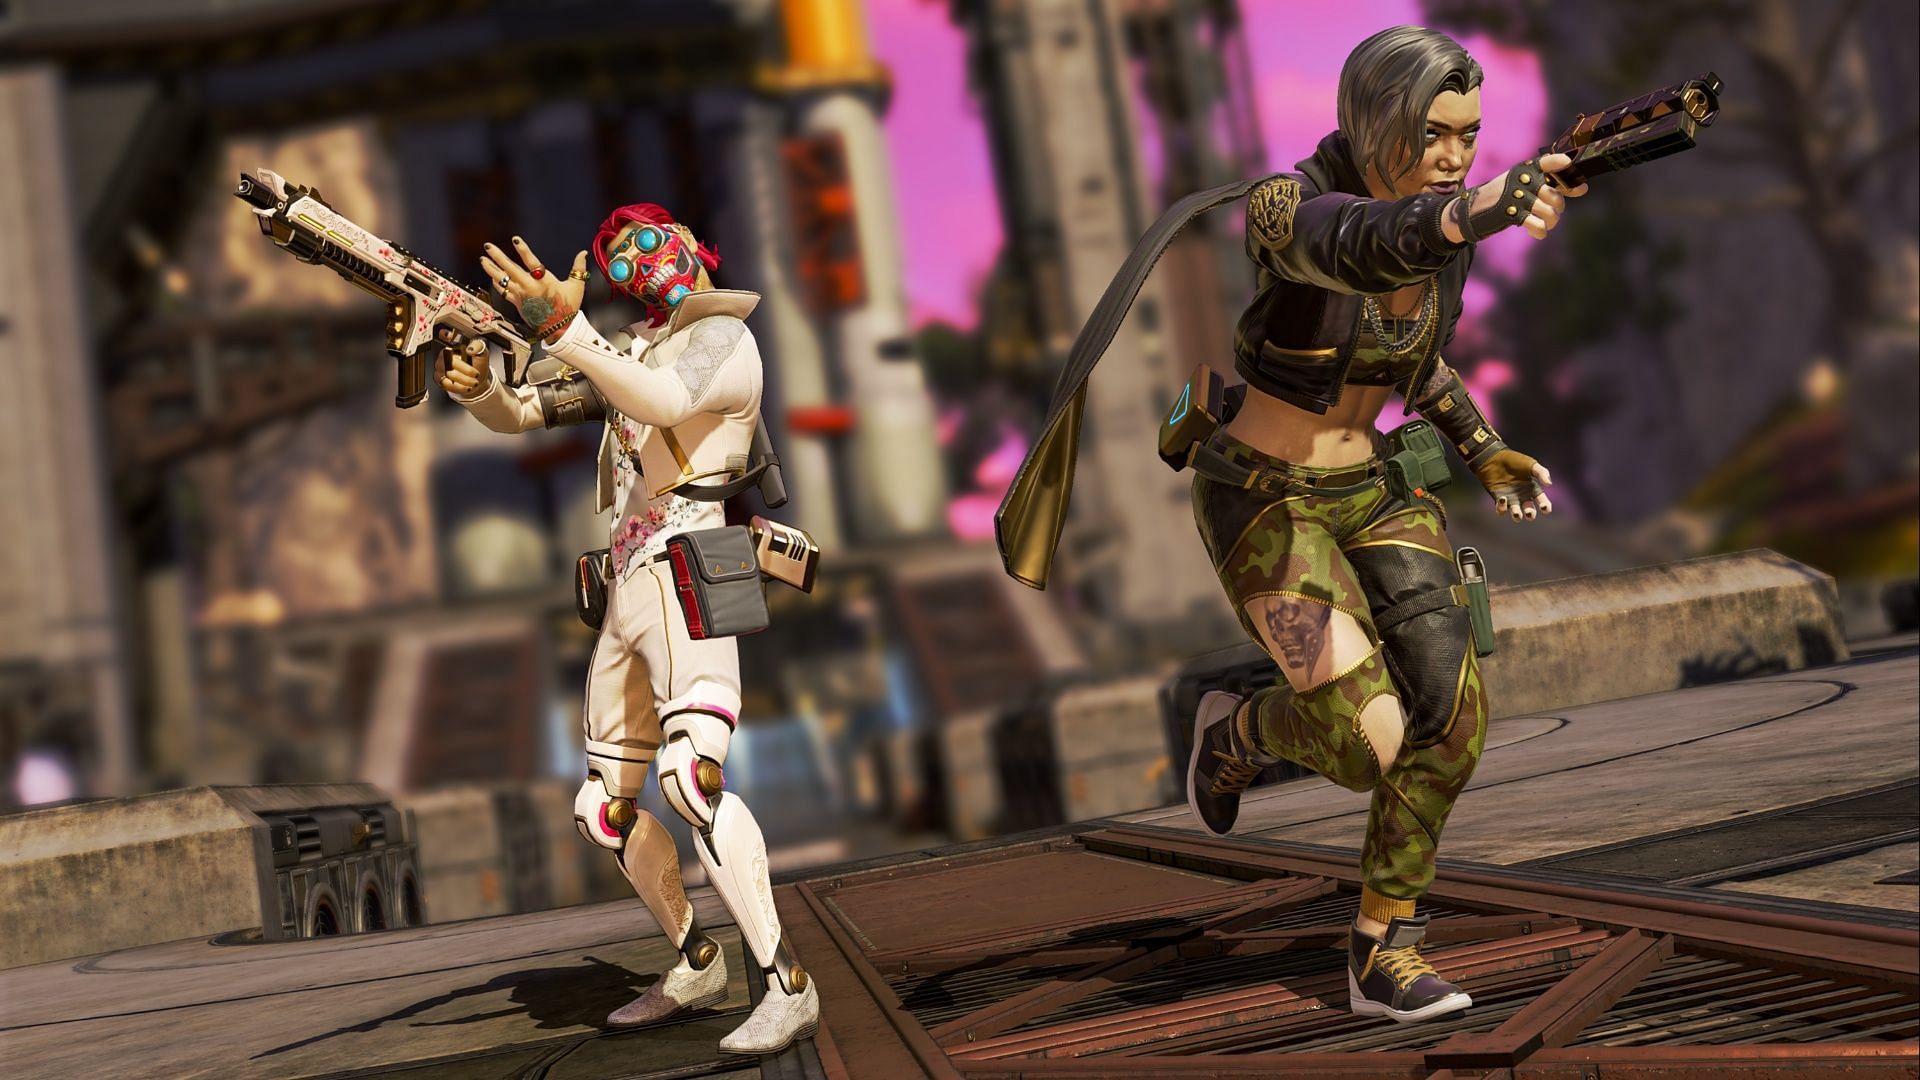 Iconic Skin for Octane and Wraith in Apex Legends x Post Malone crossover event (Image via Respawn Entertainment)